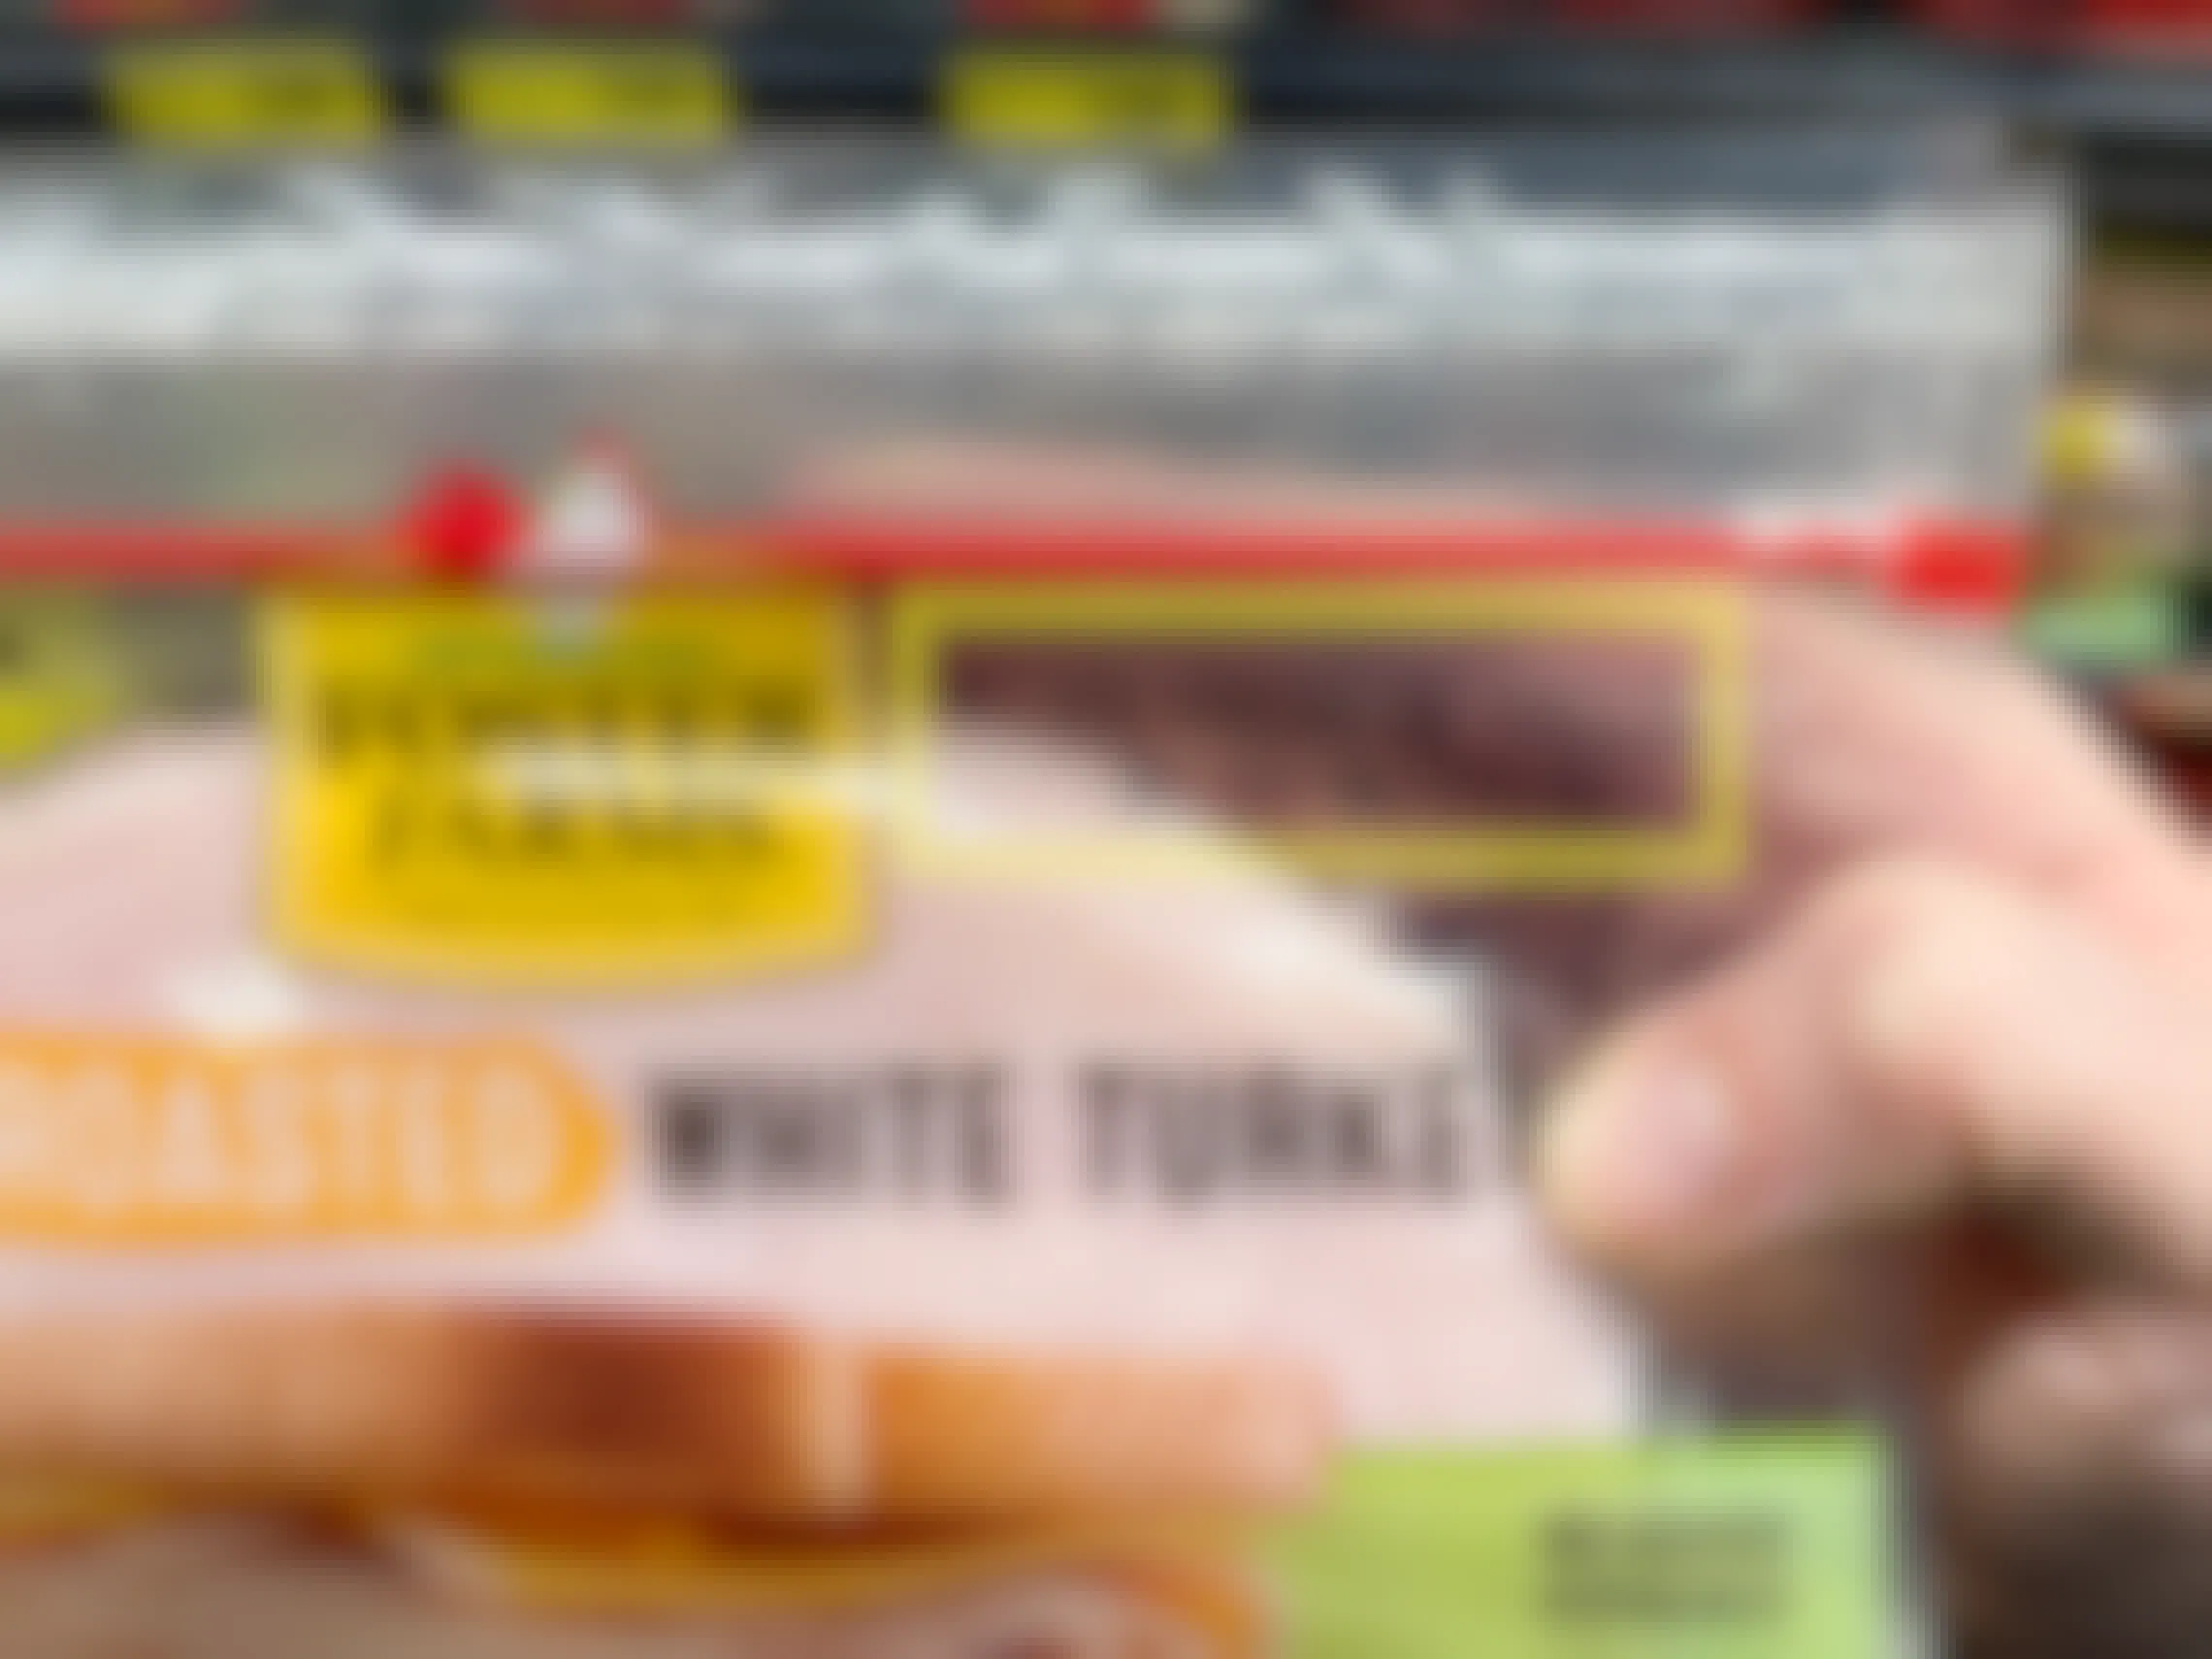 A pack of Foster Farms White Turkey sandwich meat with yellow squares around the expiration date.